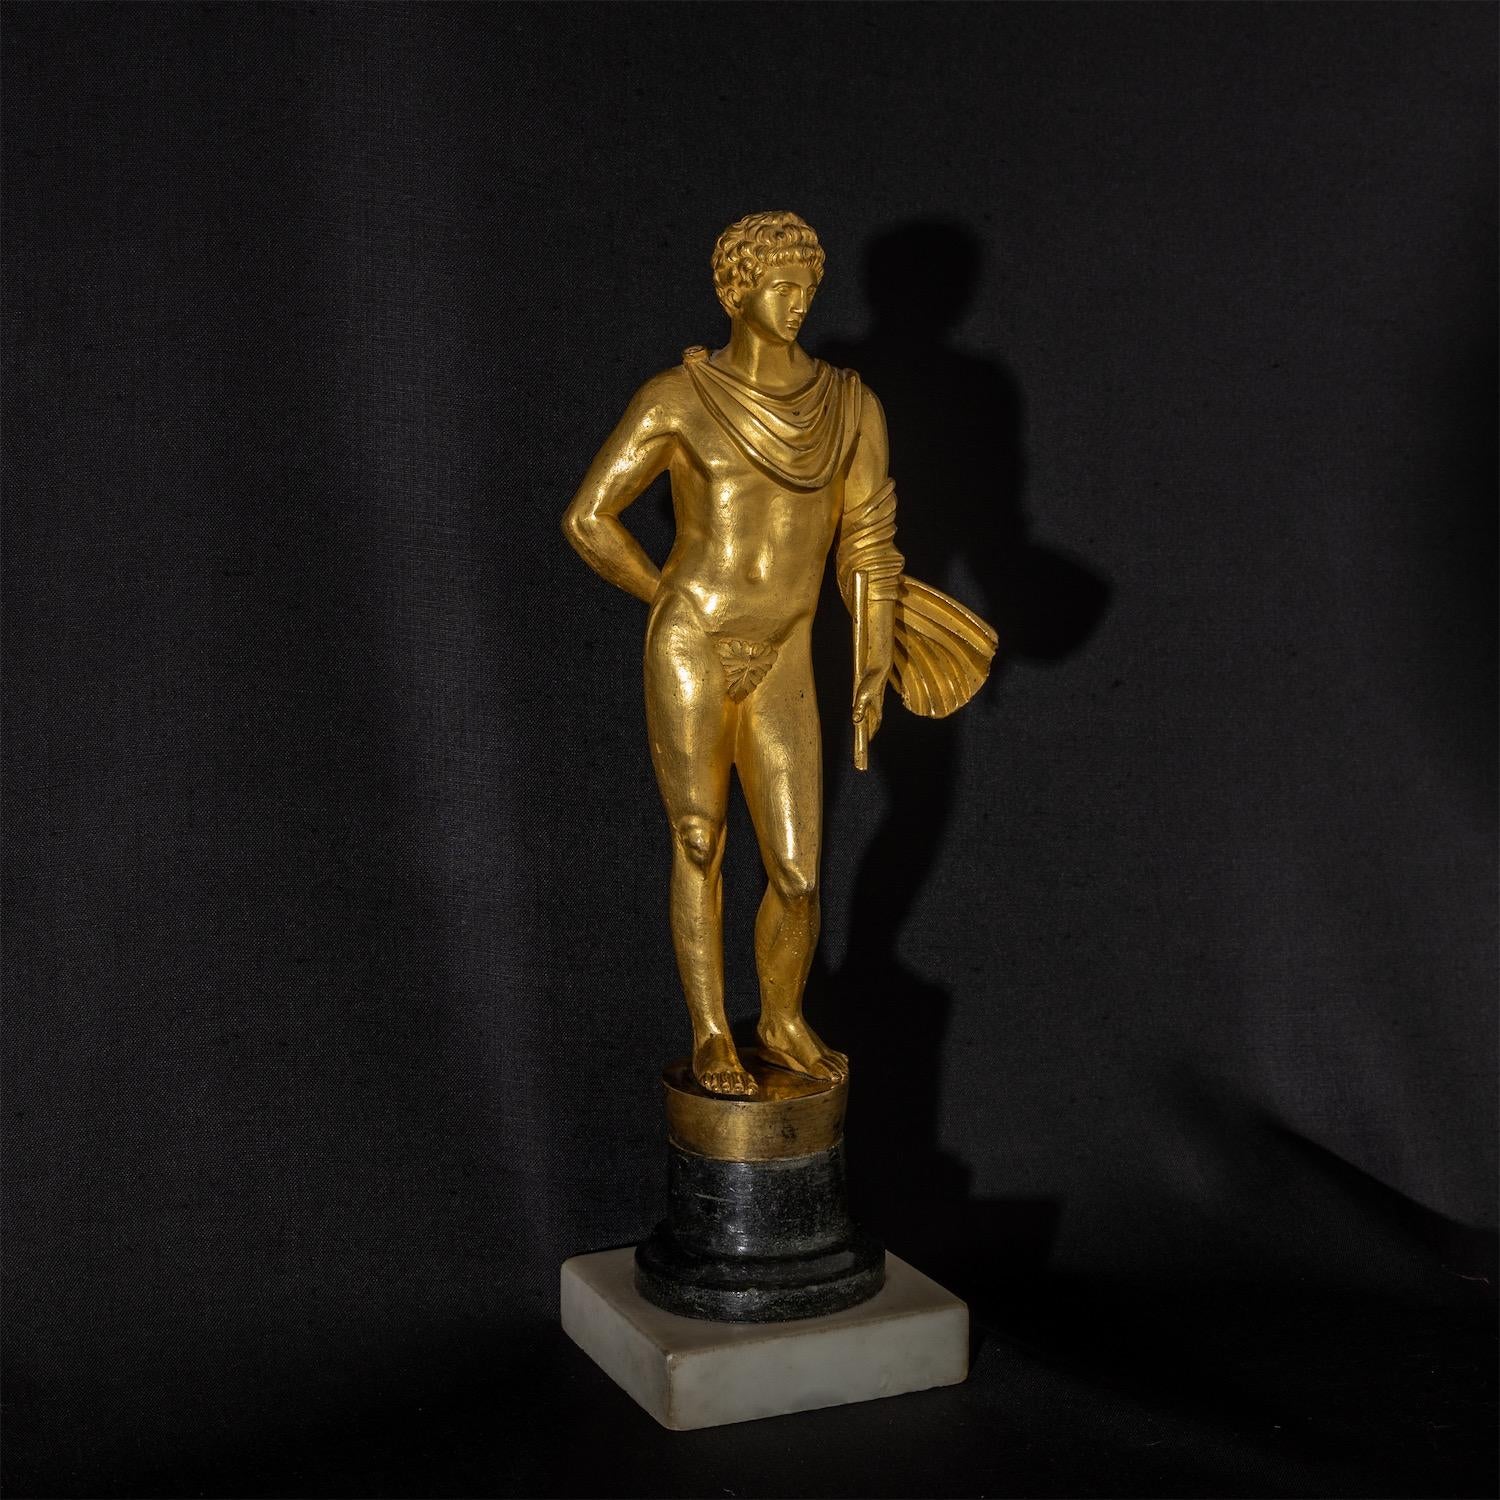 meleager statue worth